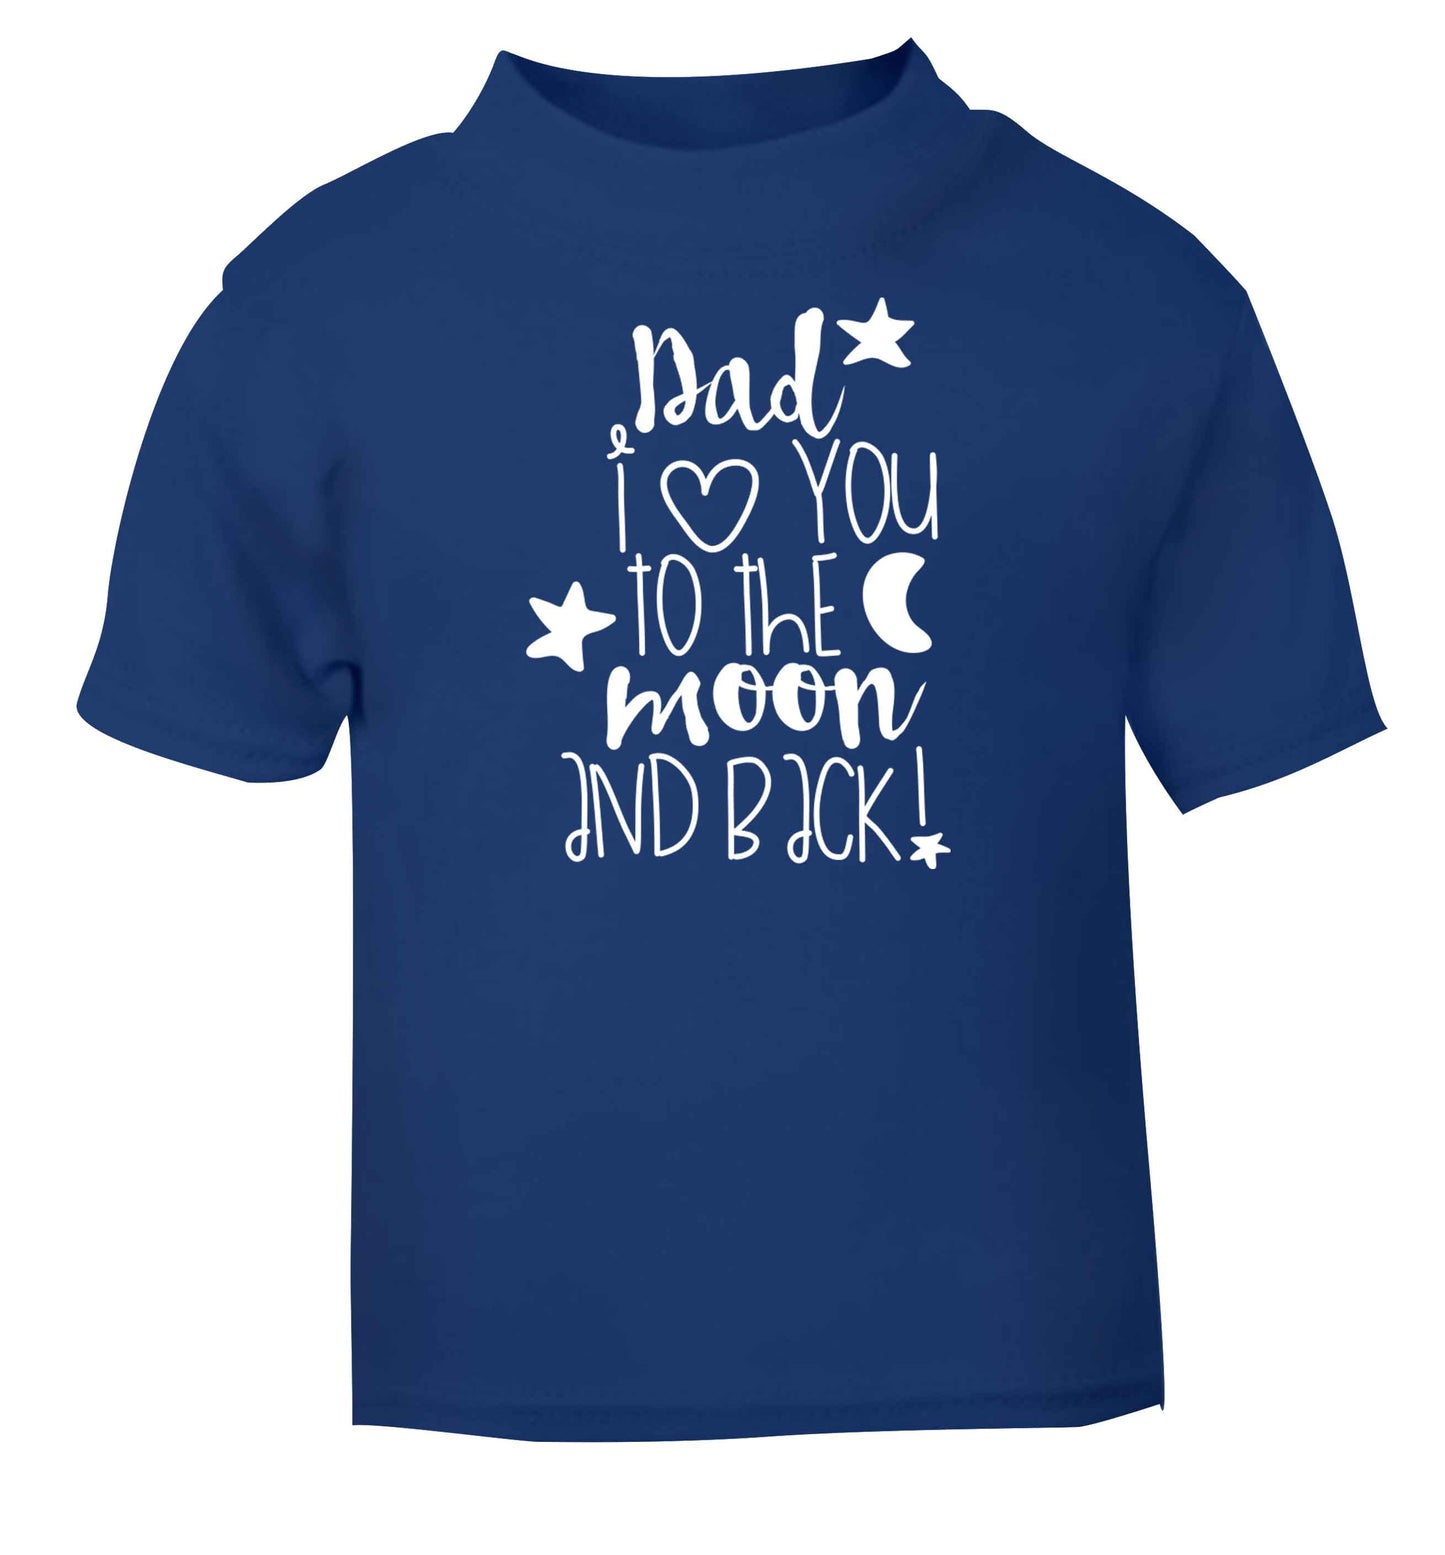 Dad I love you to the moon and back blue baby toddler Tshirt 2 Years